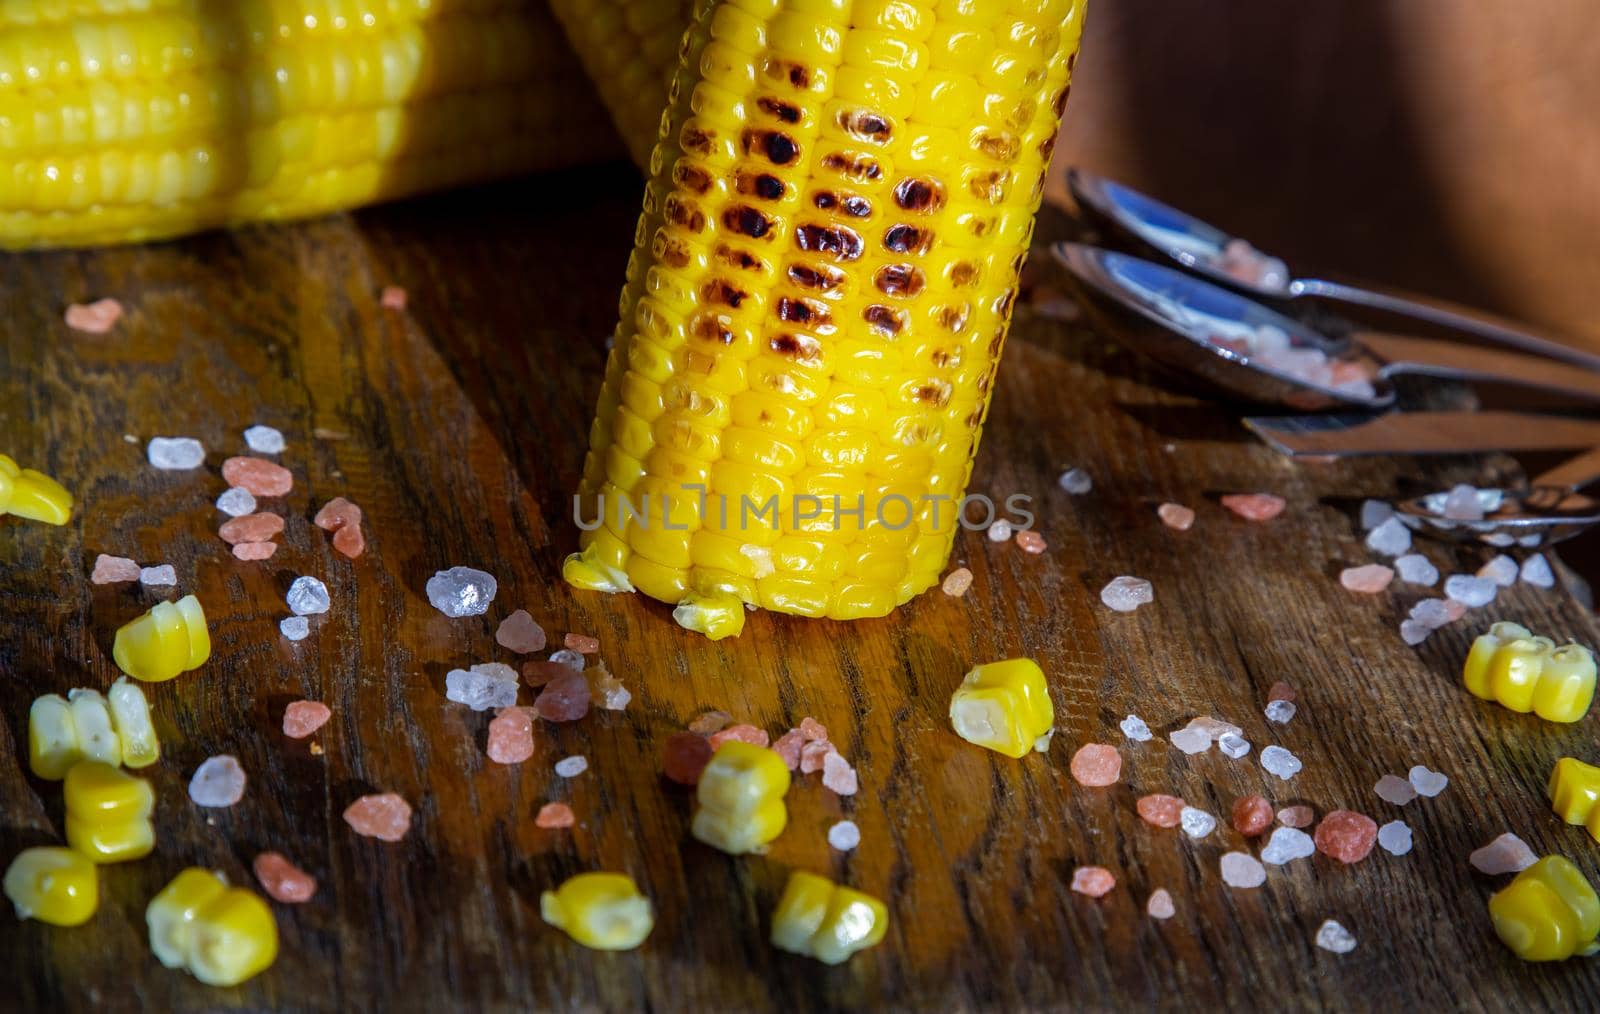 Grilled corn on the cob  on rustic wooden board over brown leather background.  by tosirikul